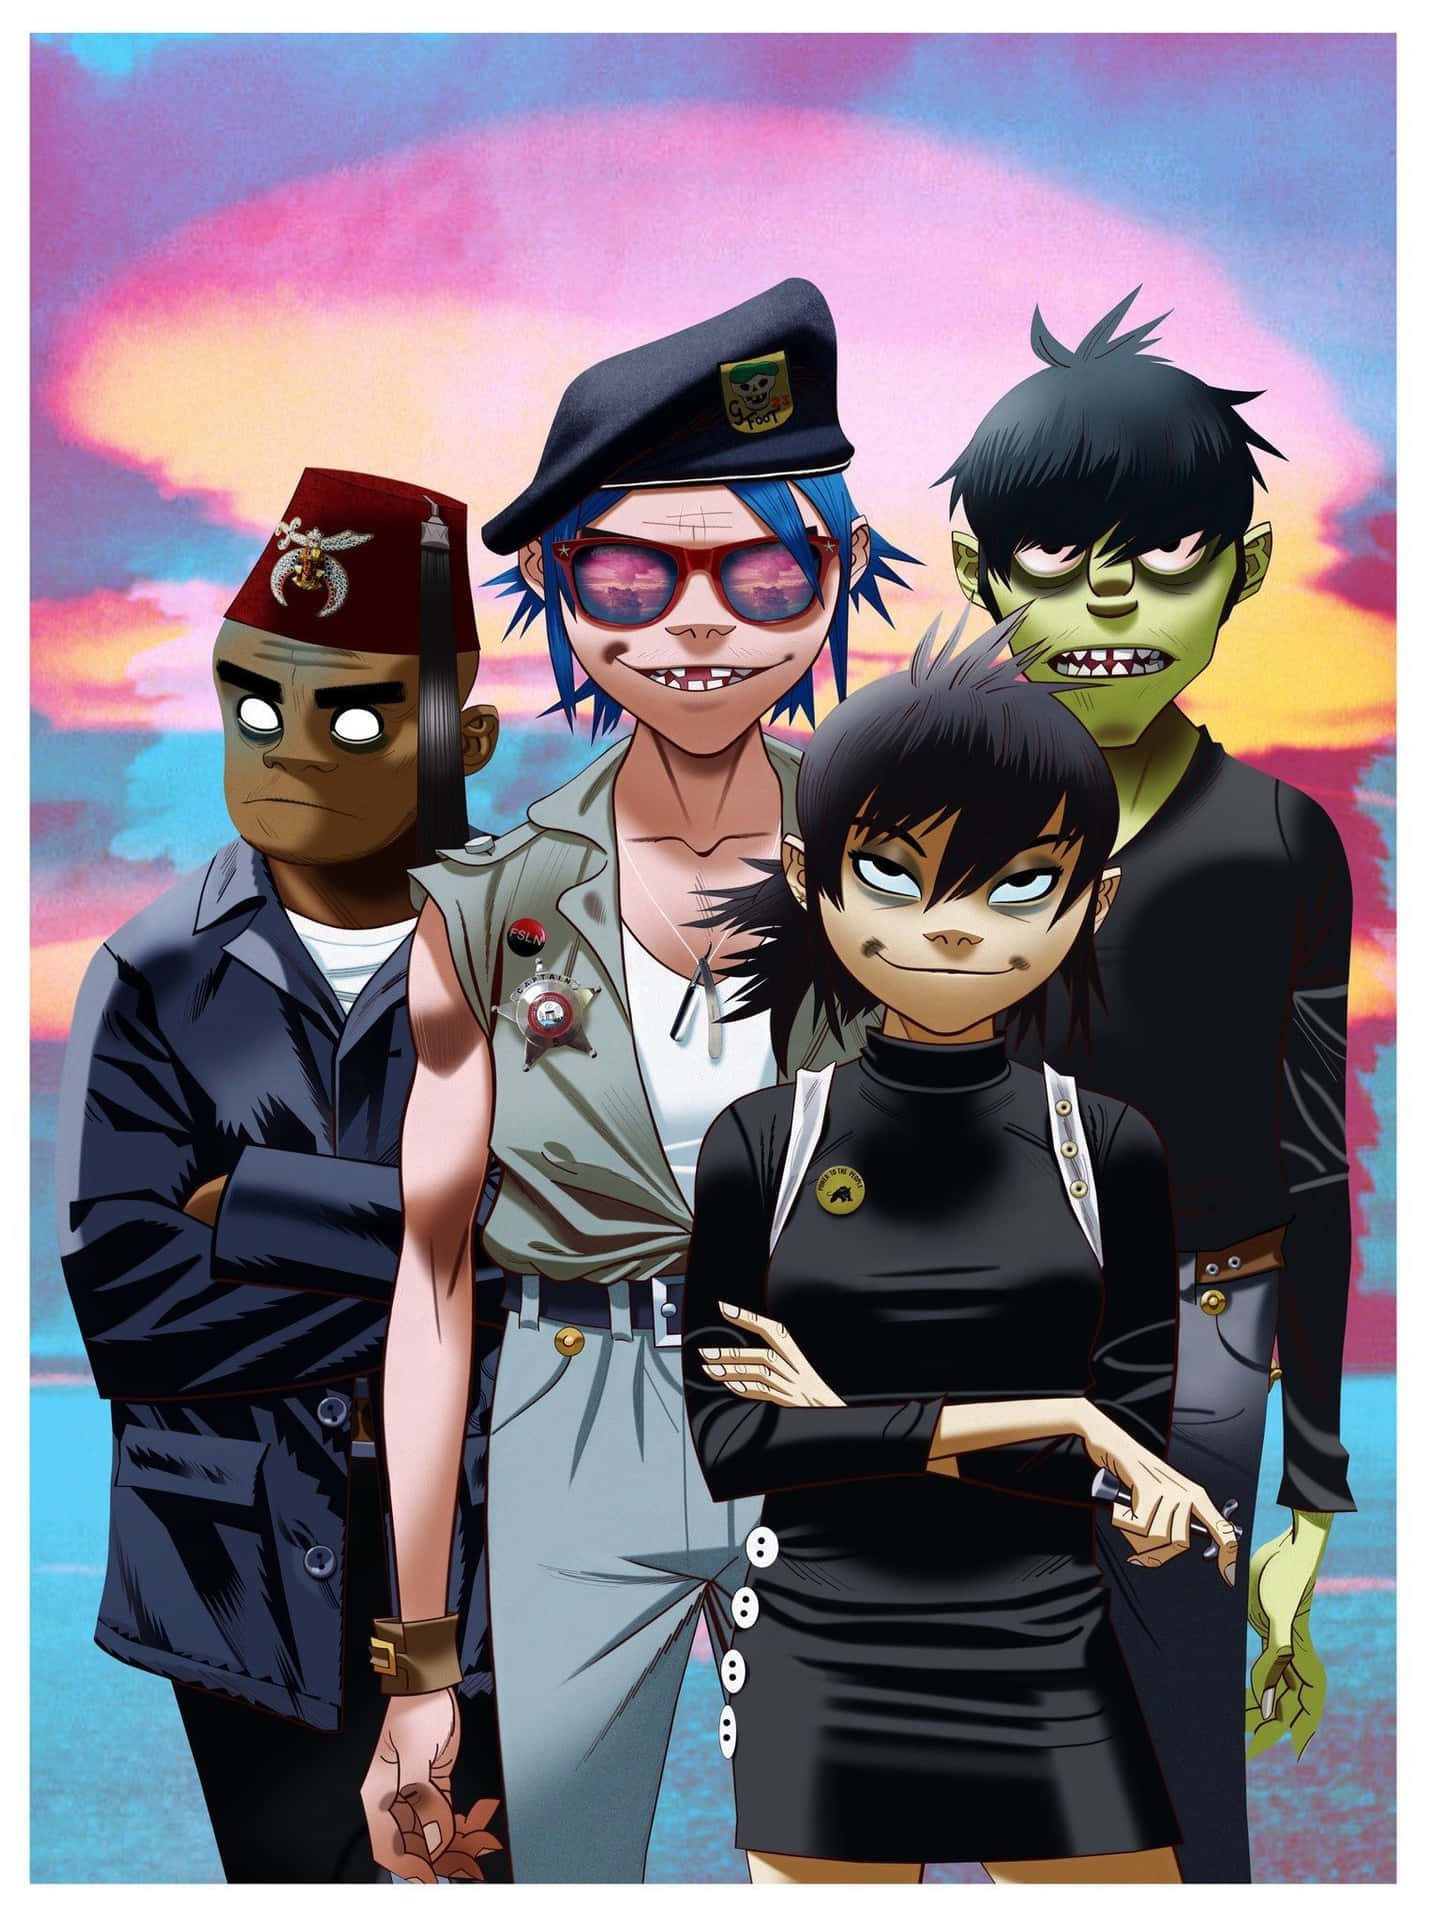 Gorillaz Iphone Band Members At The Beach Background